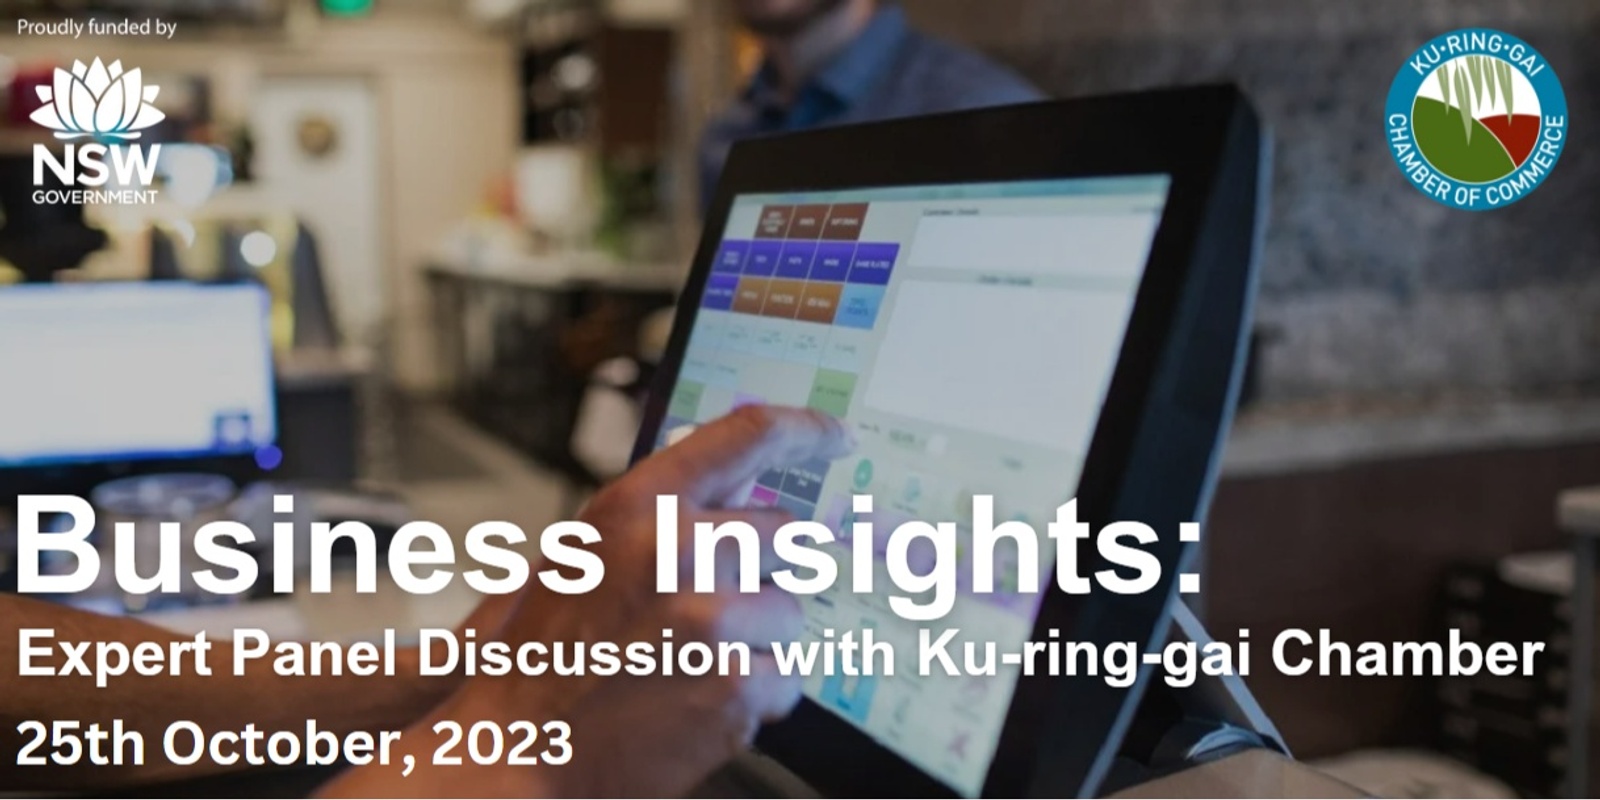 Banner image for Business Insights: Expert Panel Discussion with Ku-ring-gai Chamber